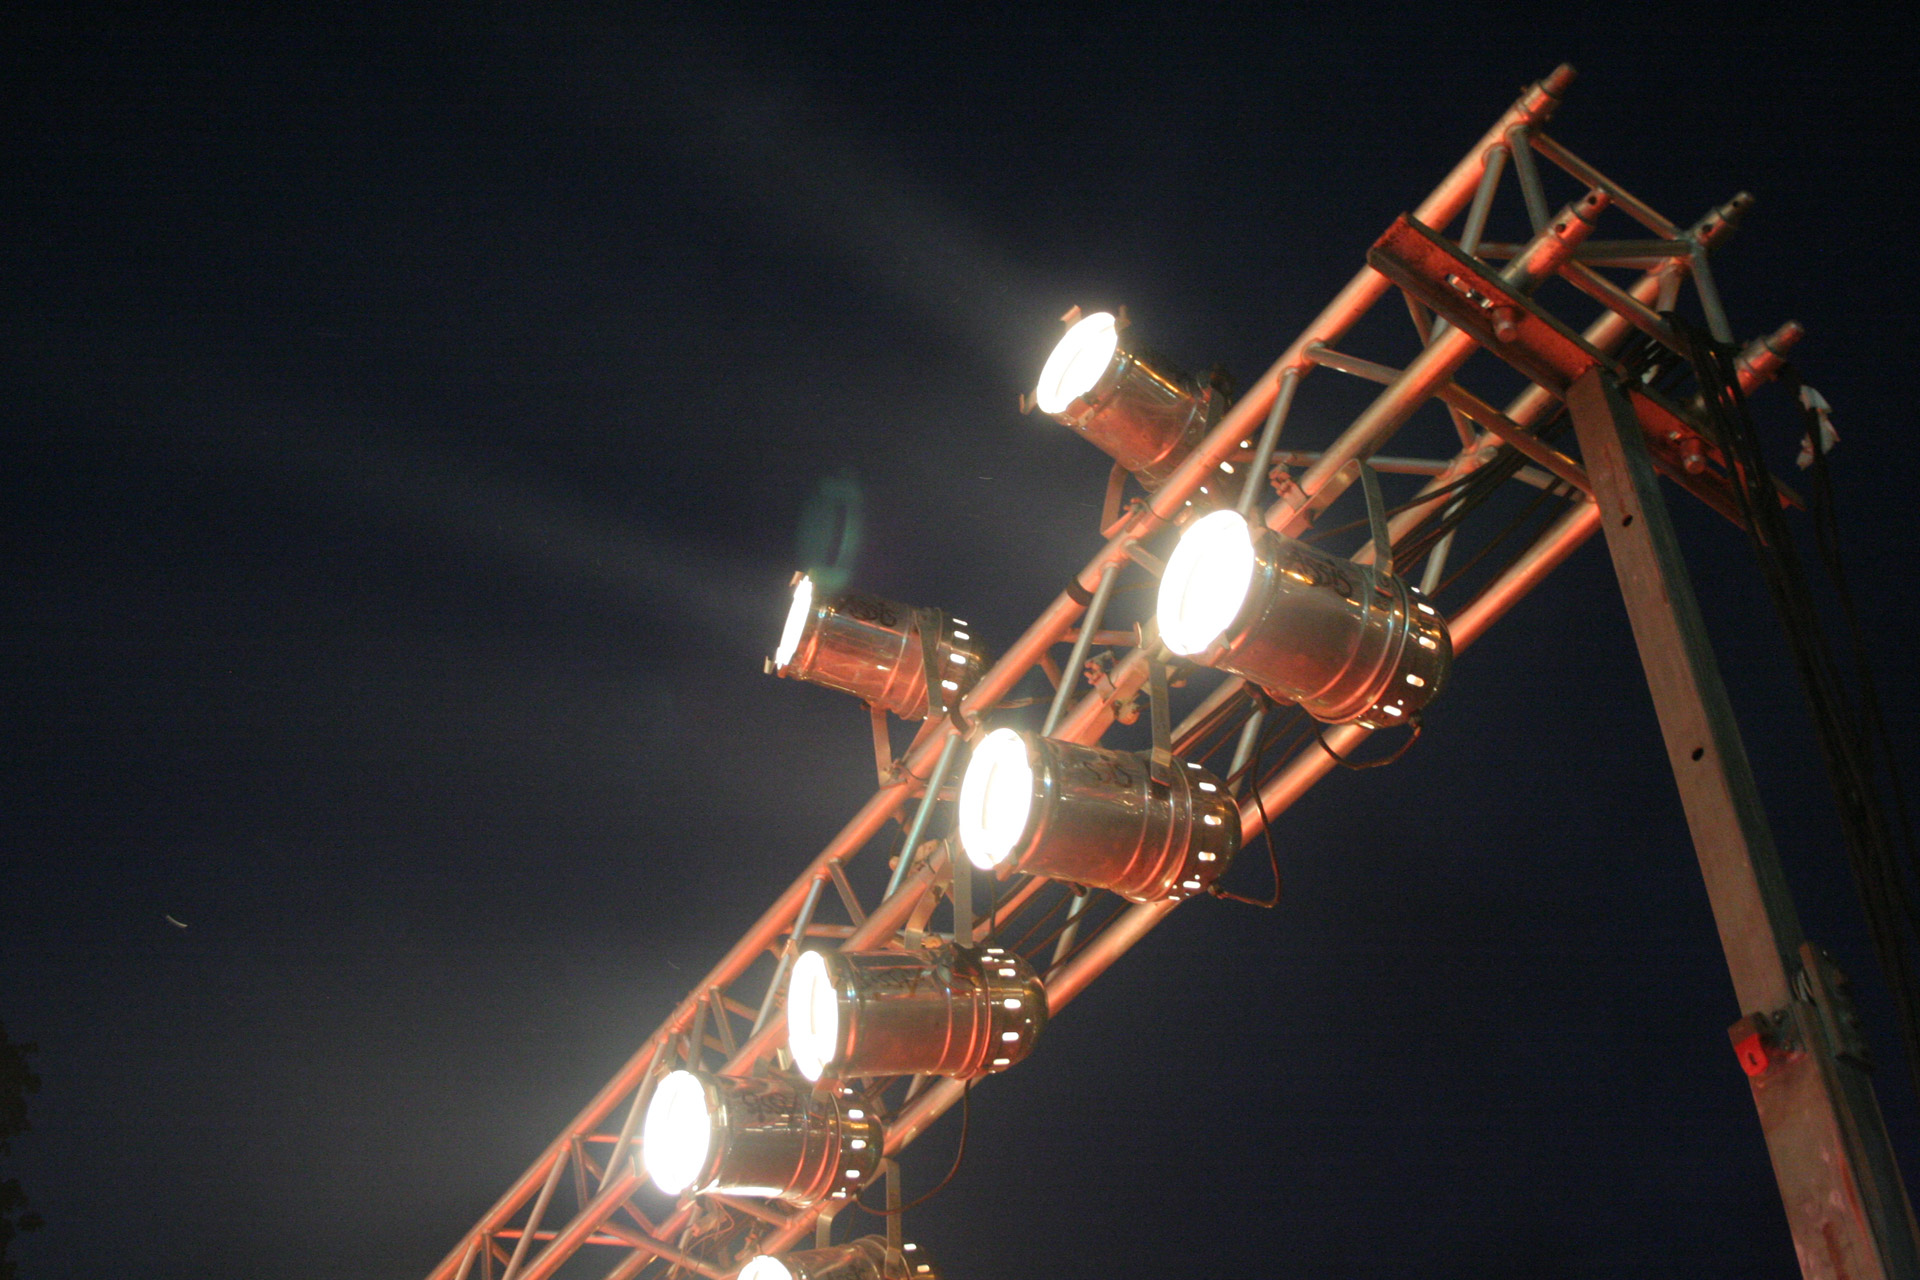 show-lights-ii-free-stock-photo-public-domain-pictures